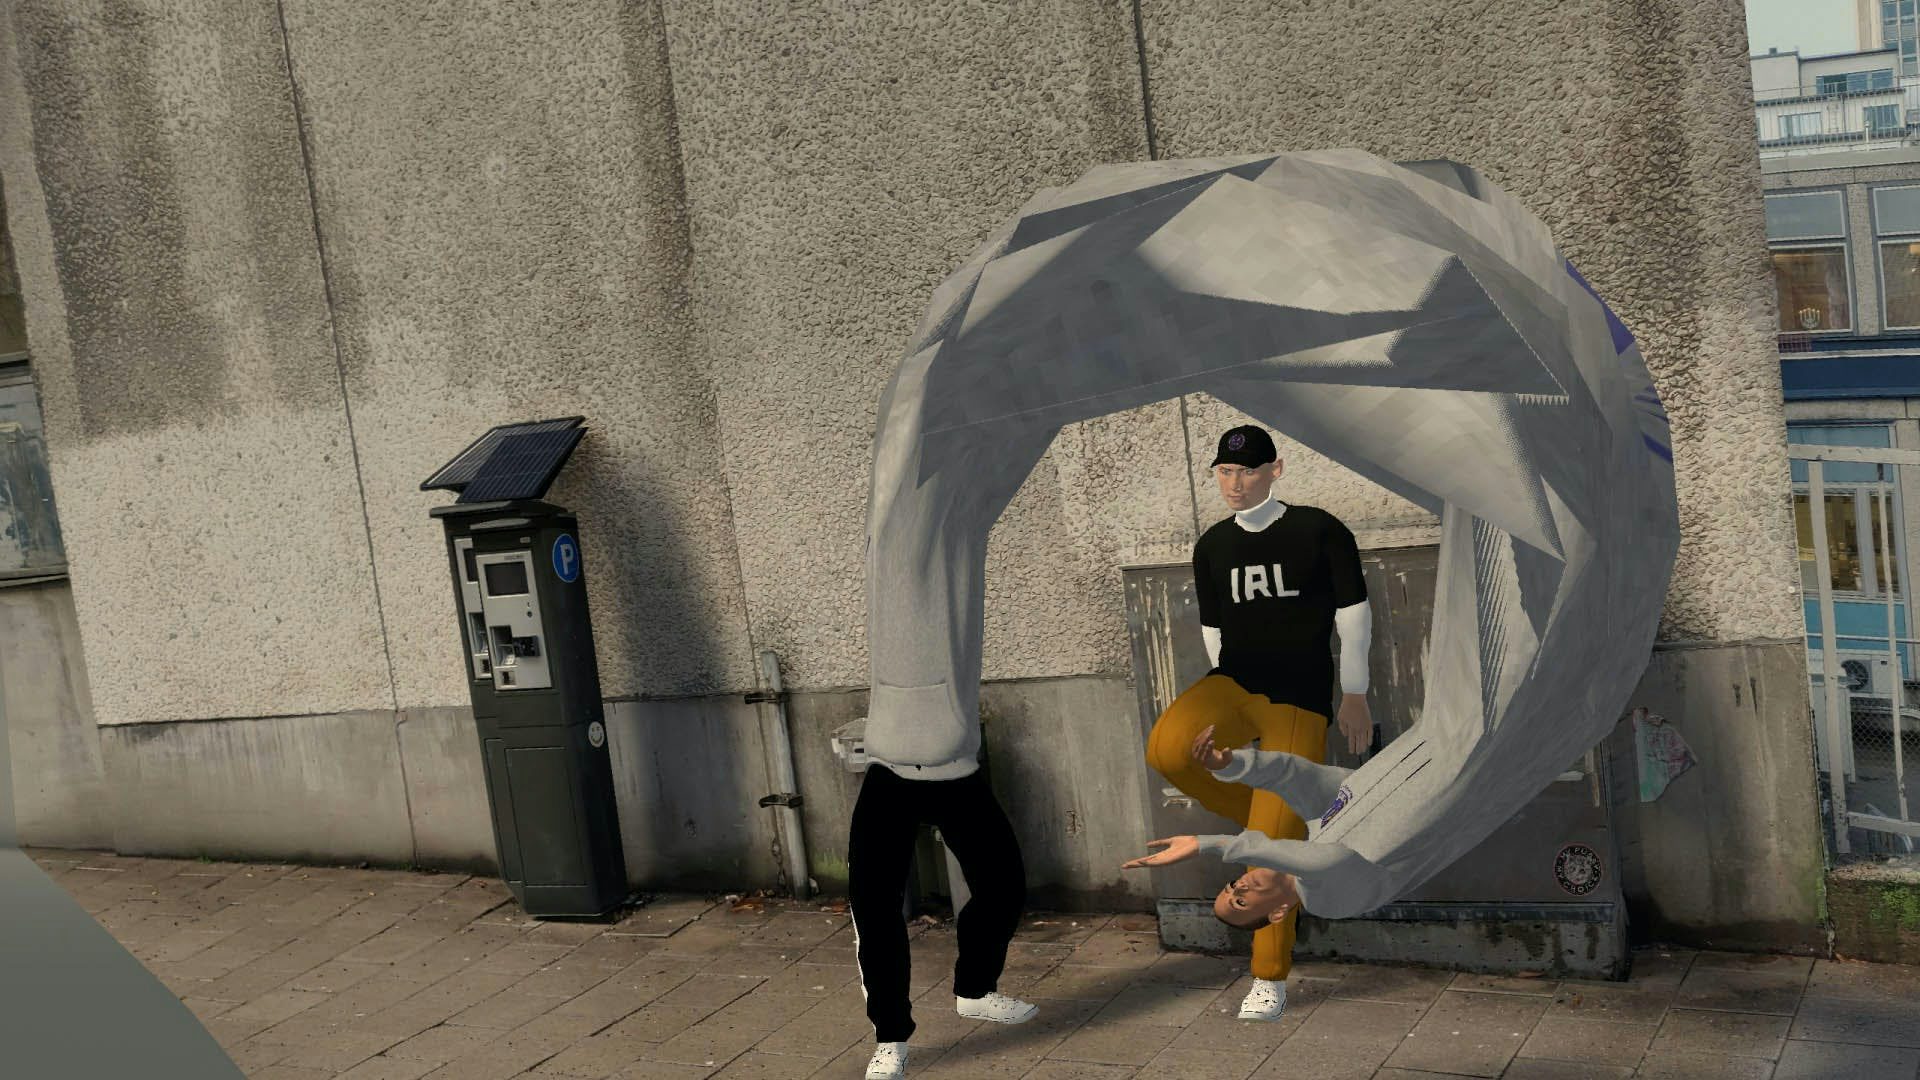 Two virtual influencers in an urban environment. One of them is leaning on a electrical cabinet wearing a shit with the text IRL on it. The other one is glitching out in front of him. His body almost forming a circle.